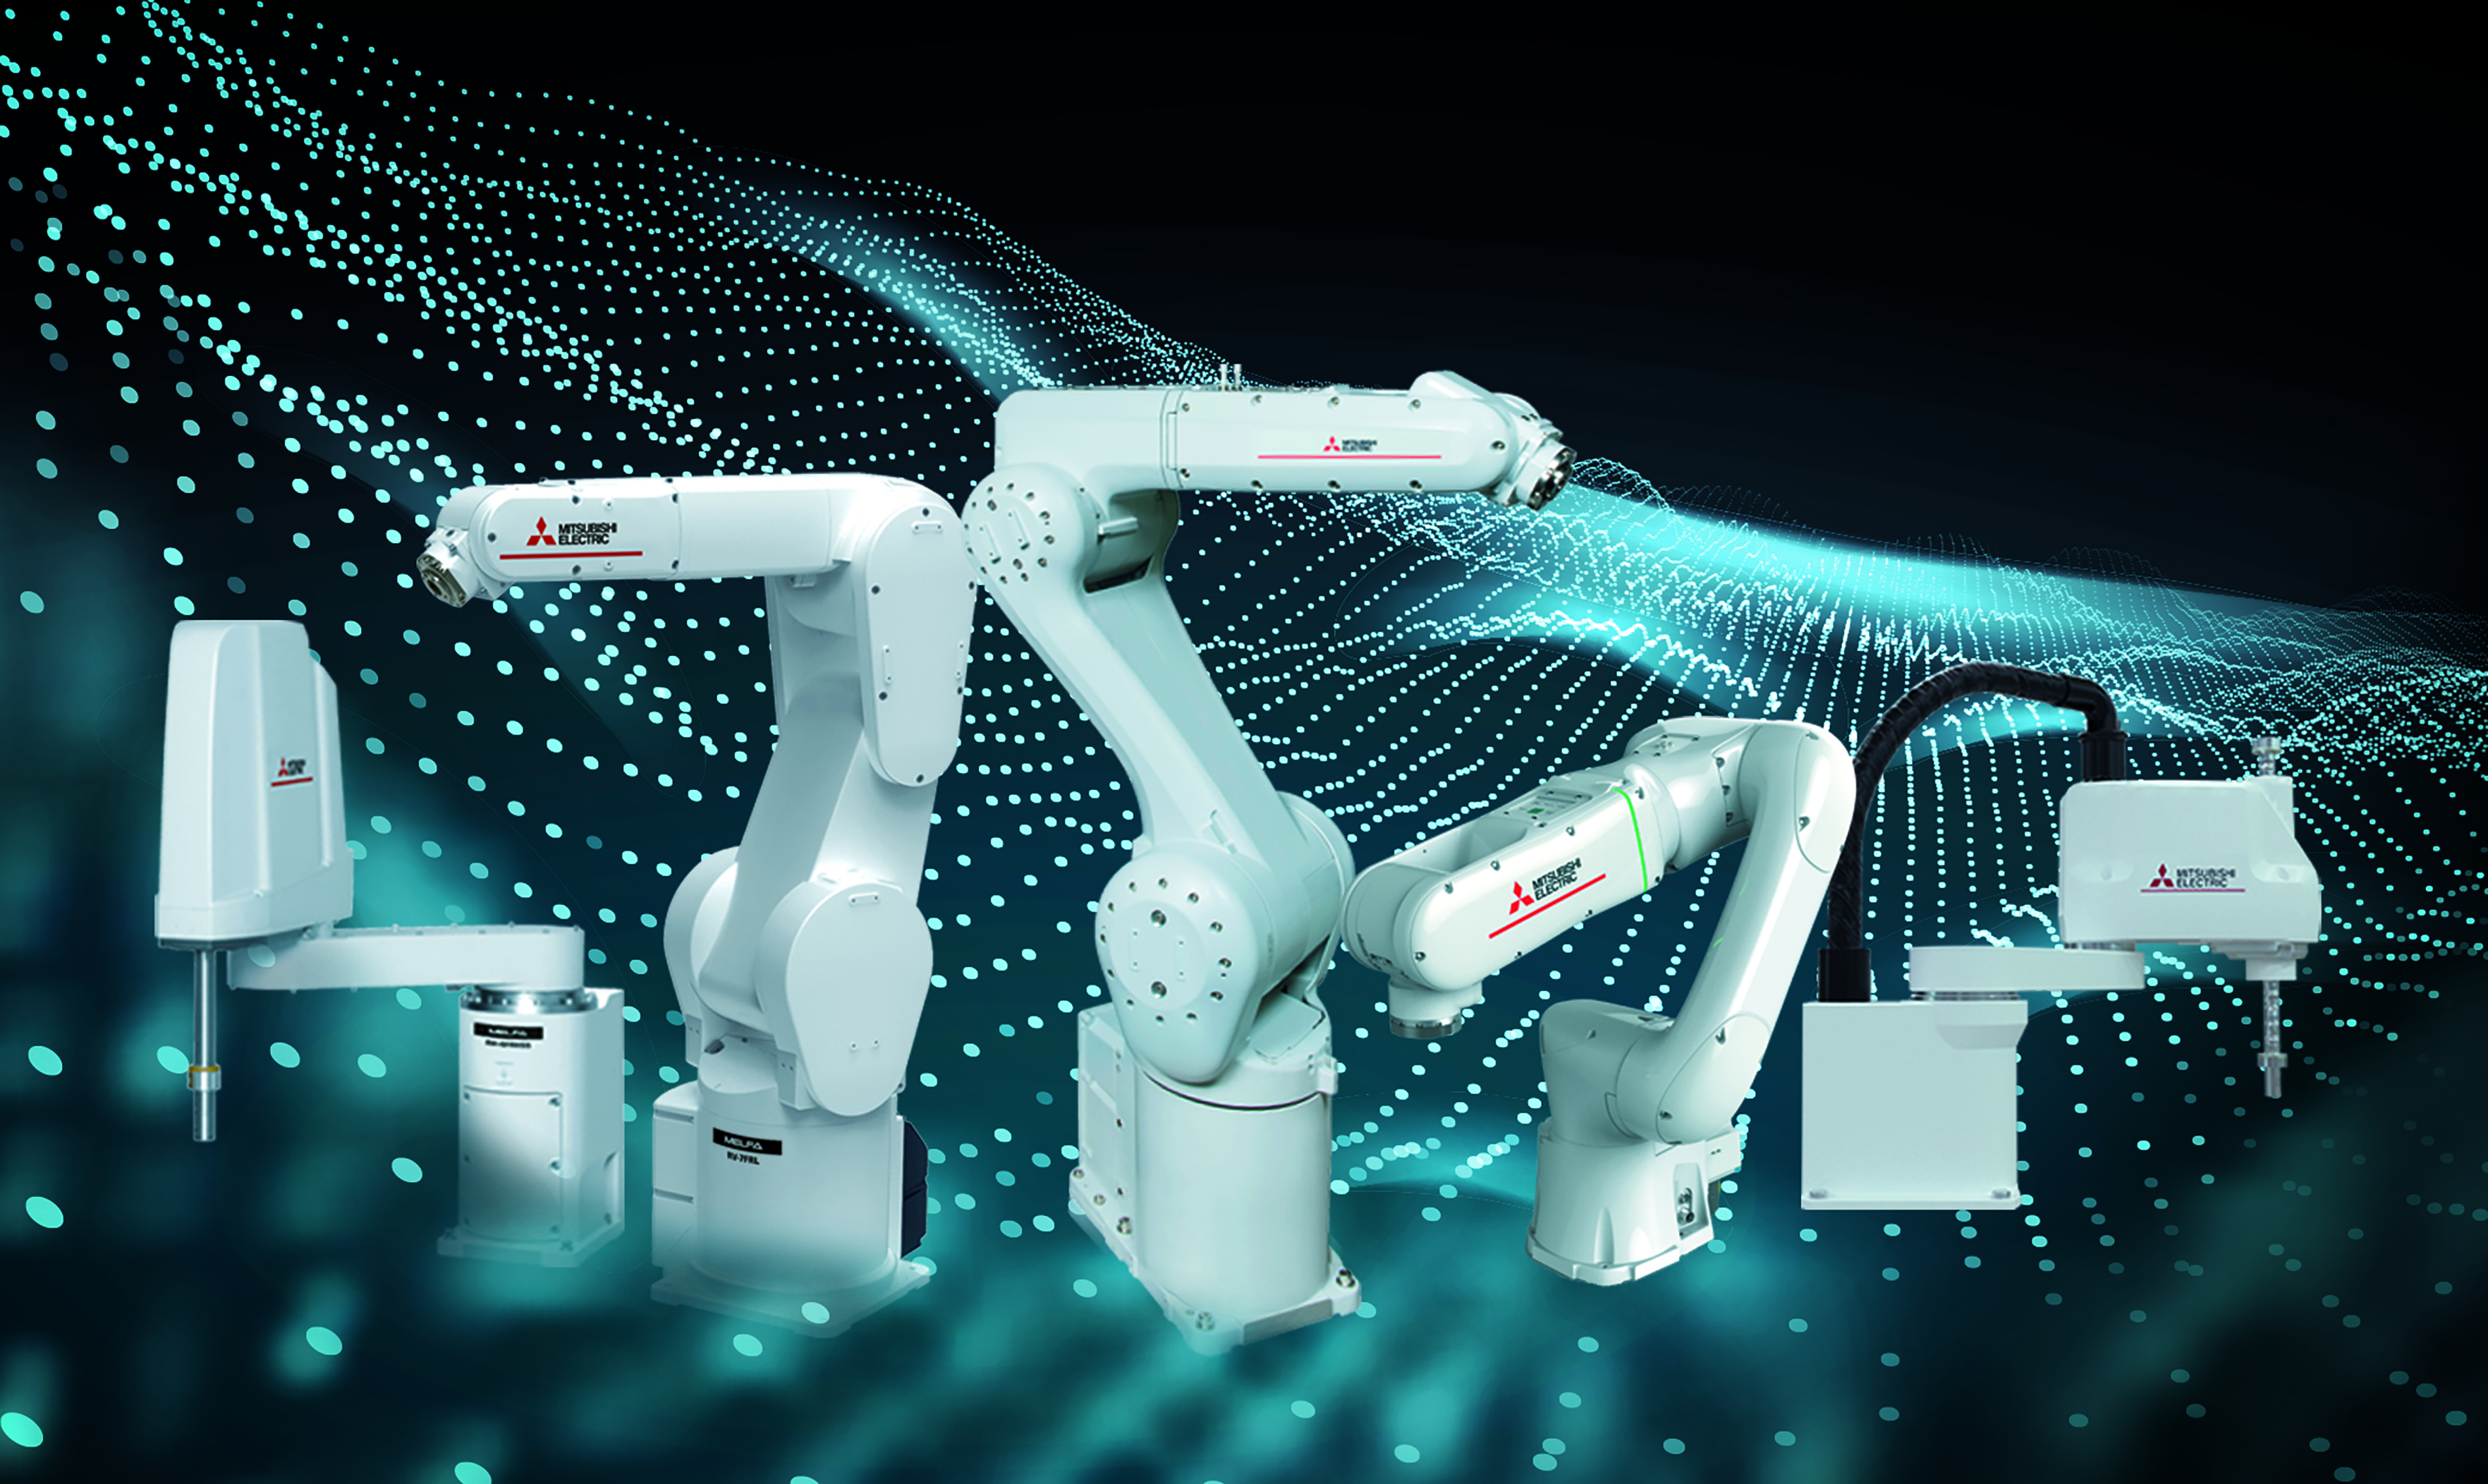 With its comprehensive range of robots, Mitsubishi Electric can help companies build smart and customised automation solutions that improve shop floor operations. [Source: Mitsubishi Electric Europe B.V.]